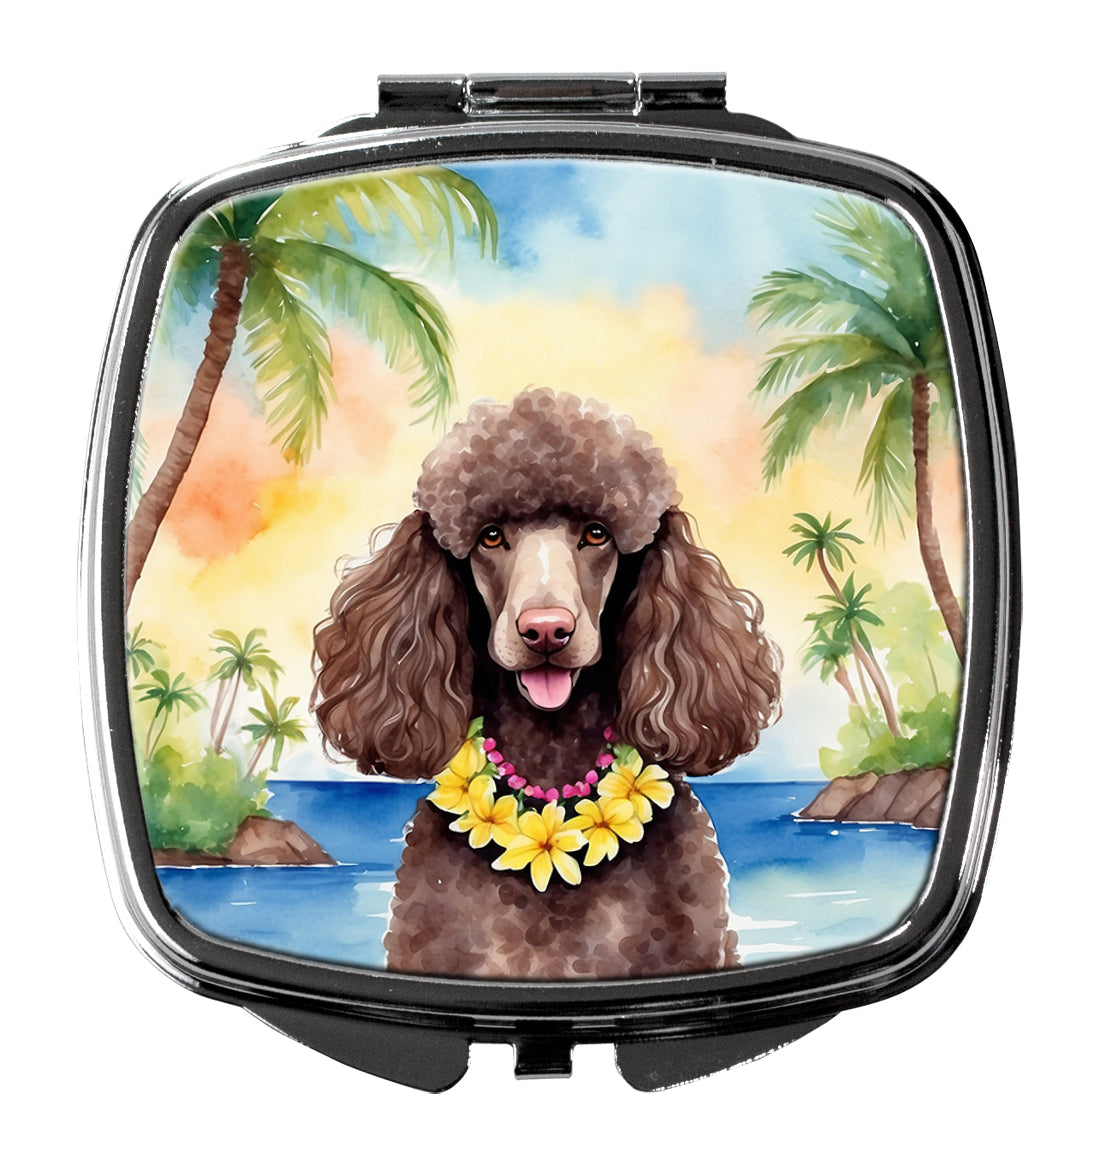 Buy this Chocolate Poodle Luau Compact Mirror